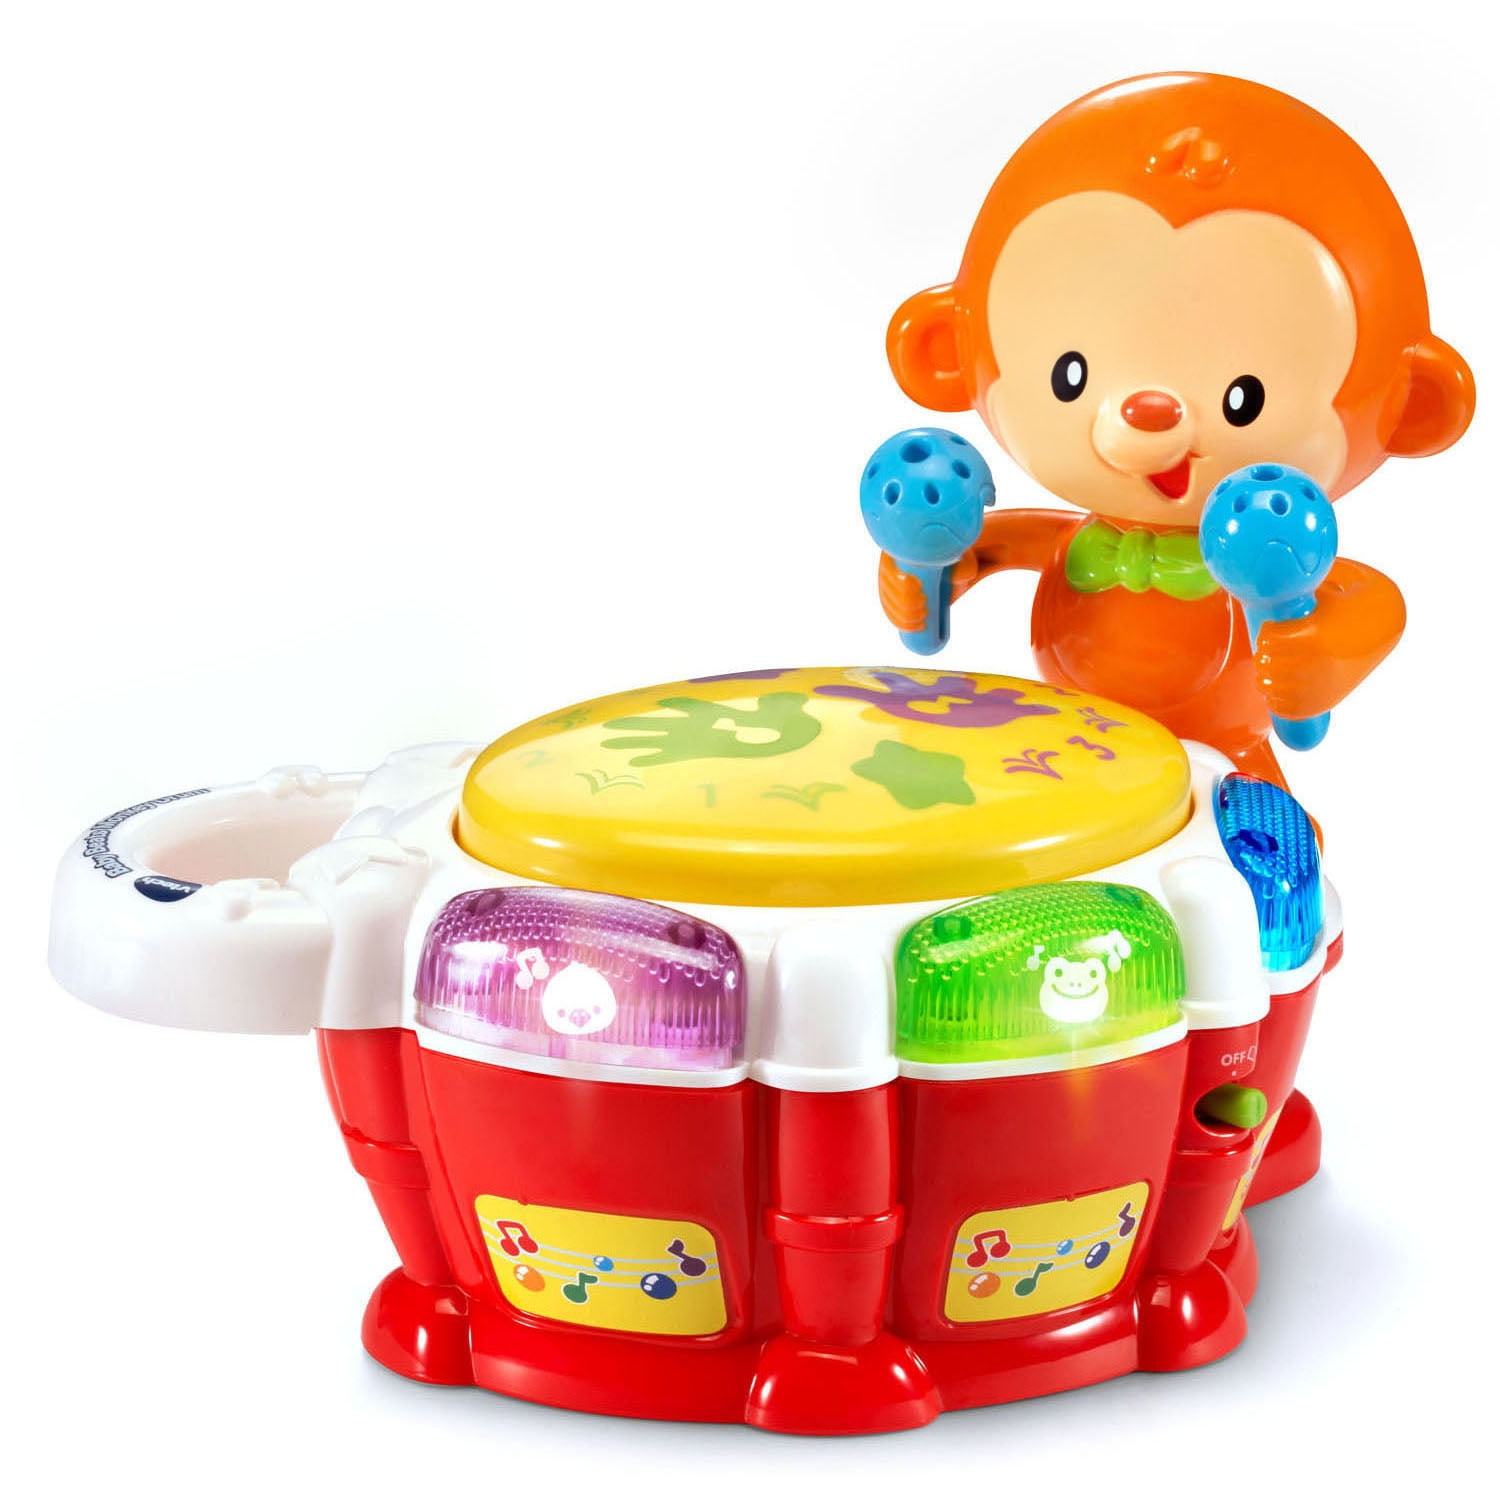 Bright Starts Light & Learn Drum│Baby/Kids Activity Toy With Music│Easy To Clean 